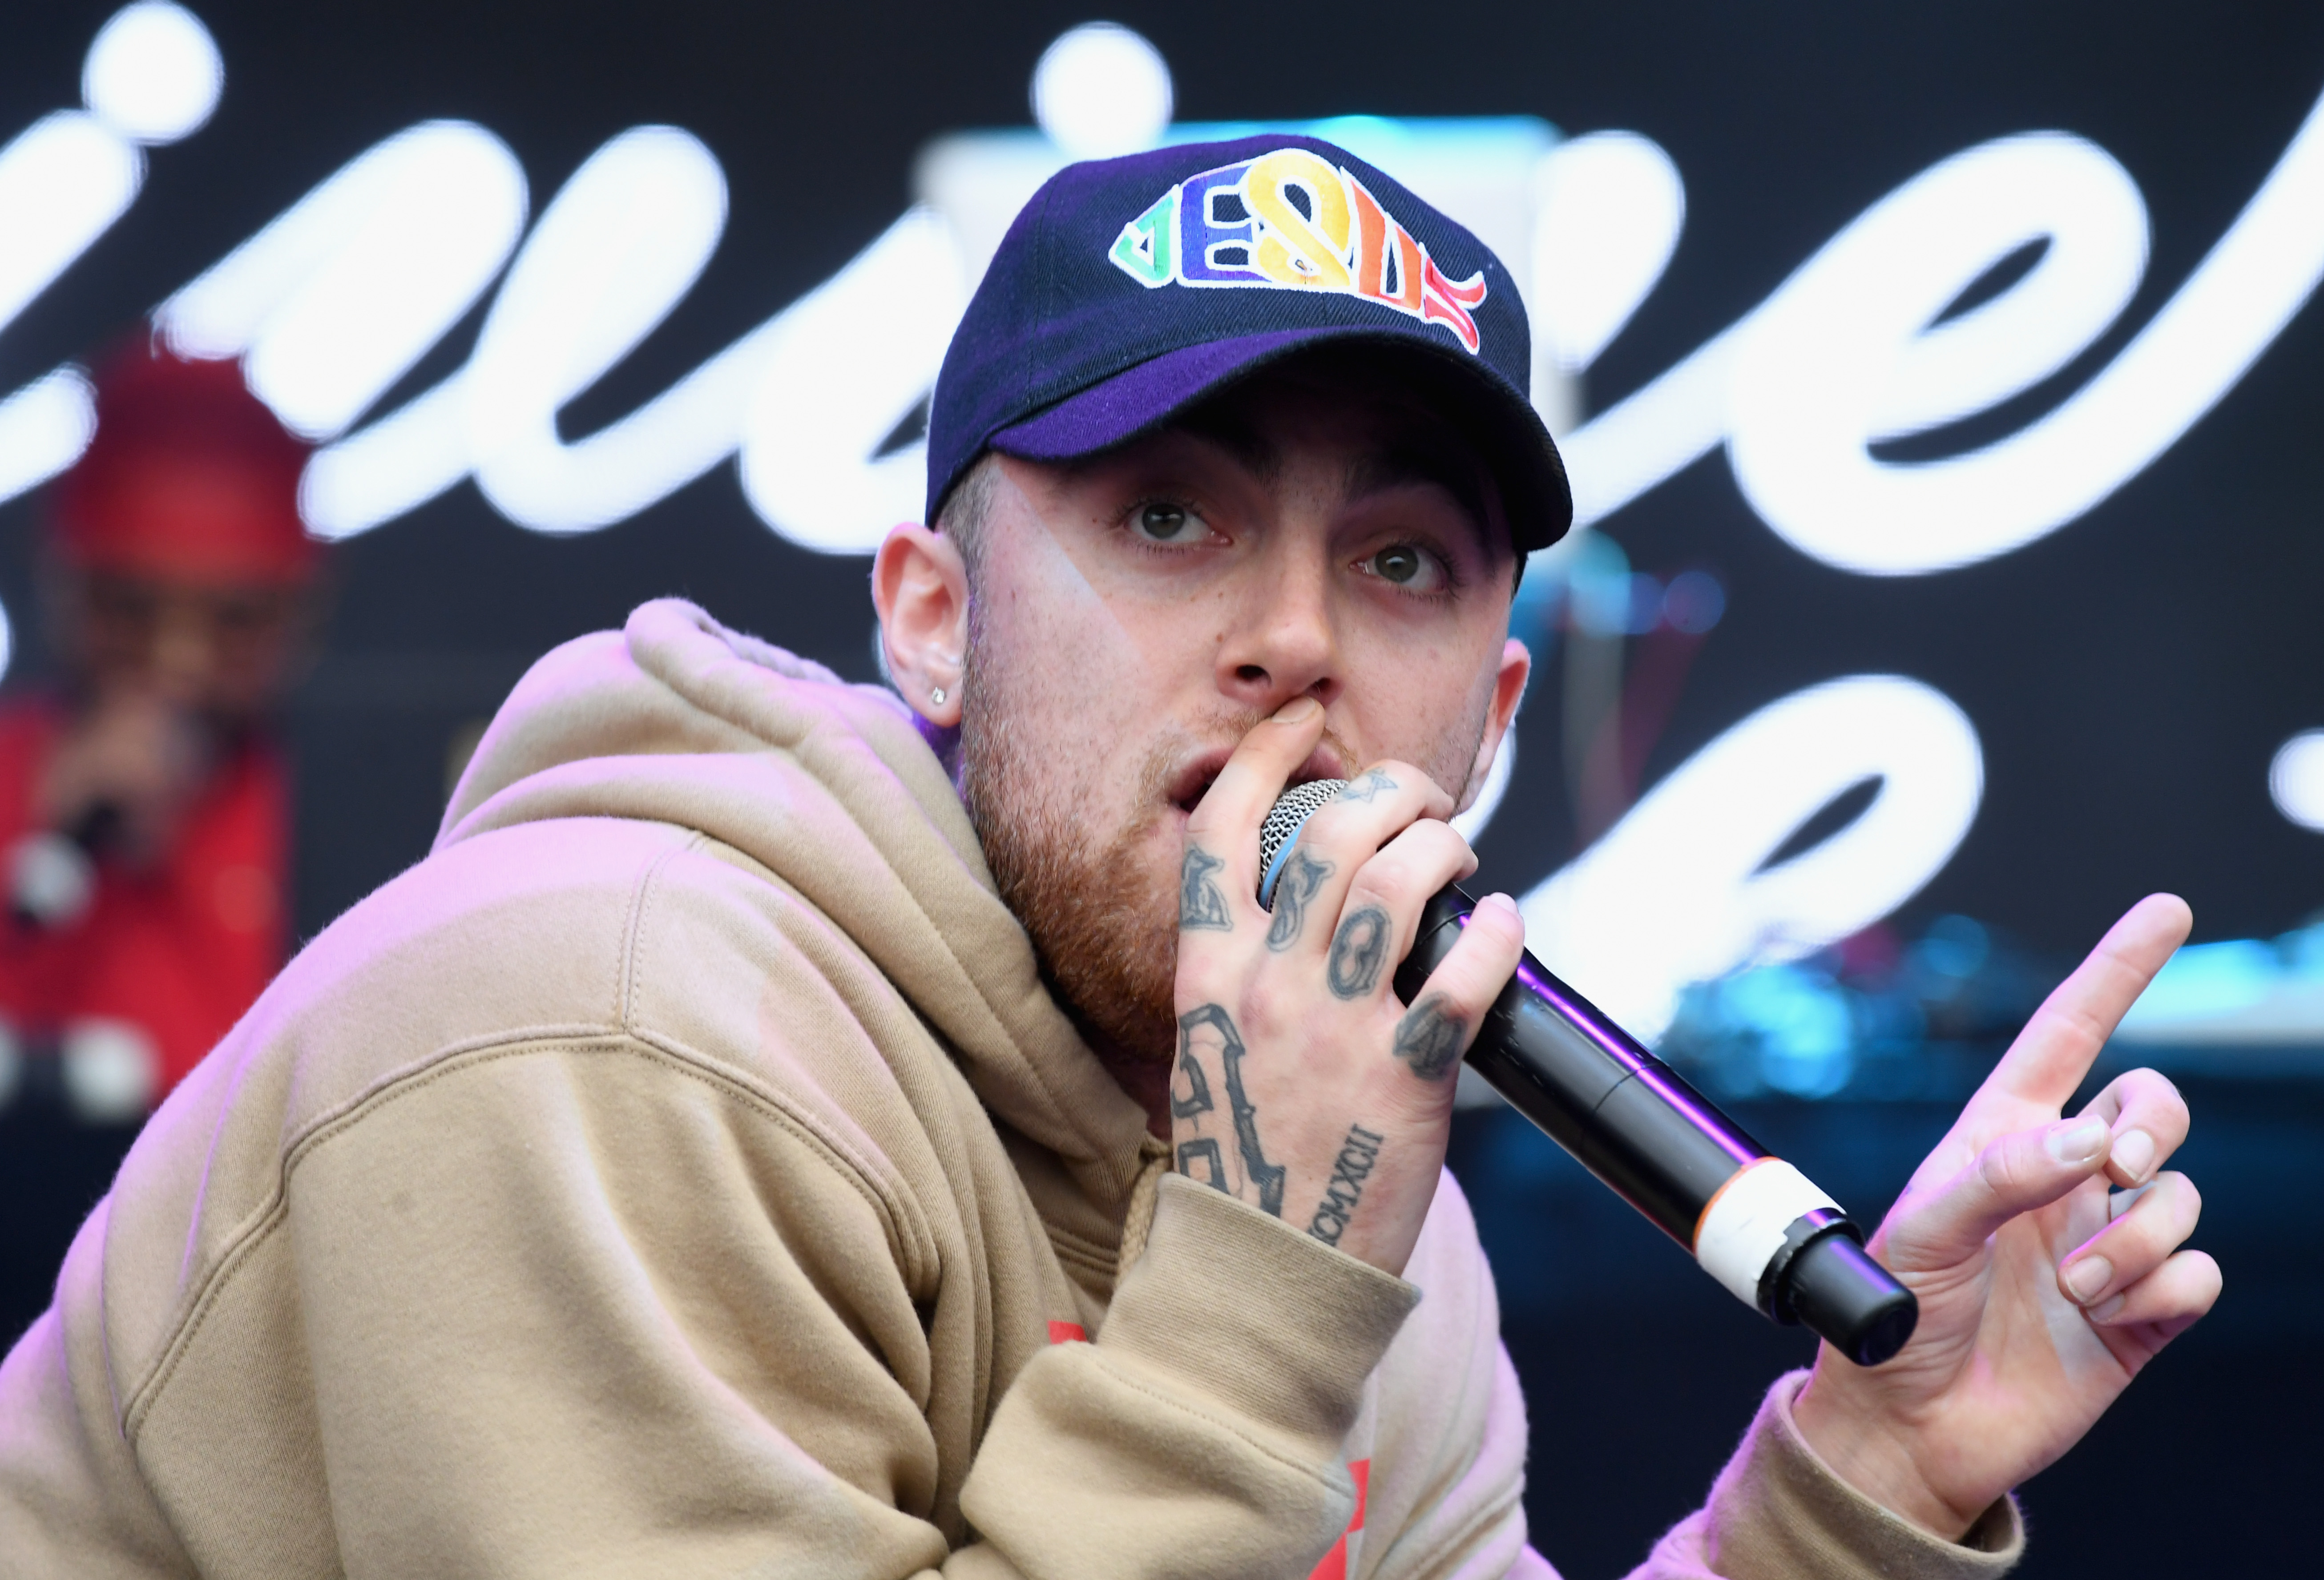 Mac miller nothing from nothing spotify playlist